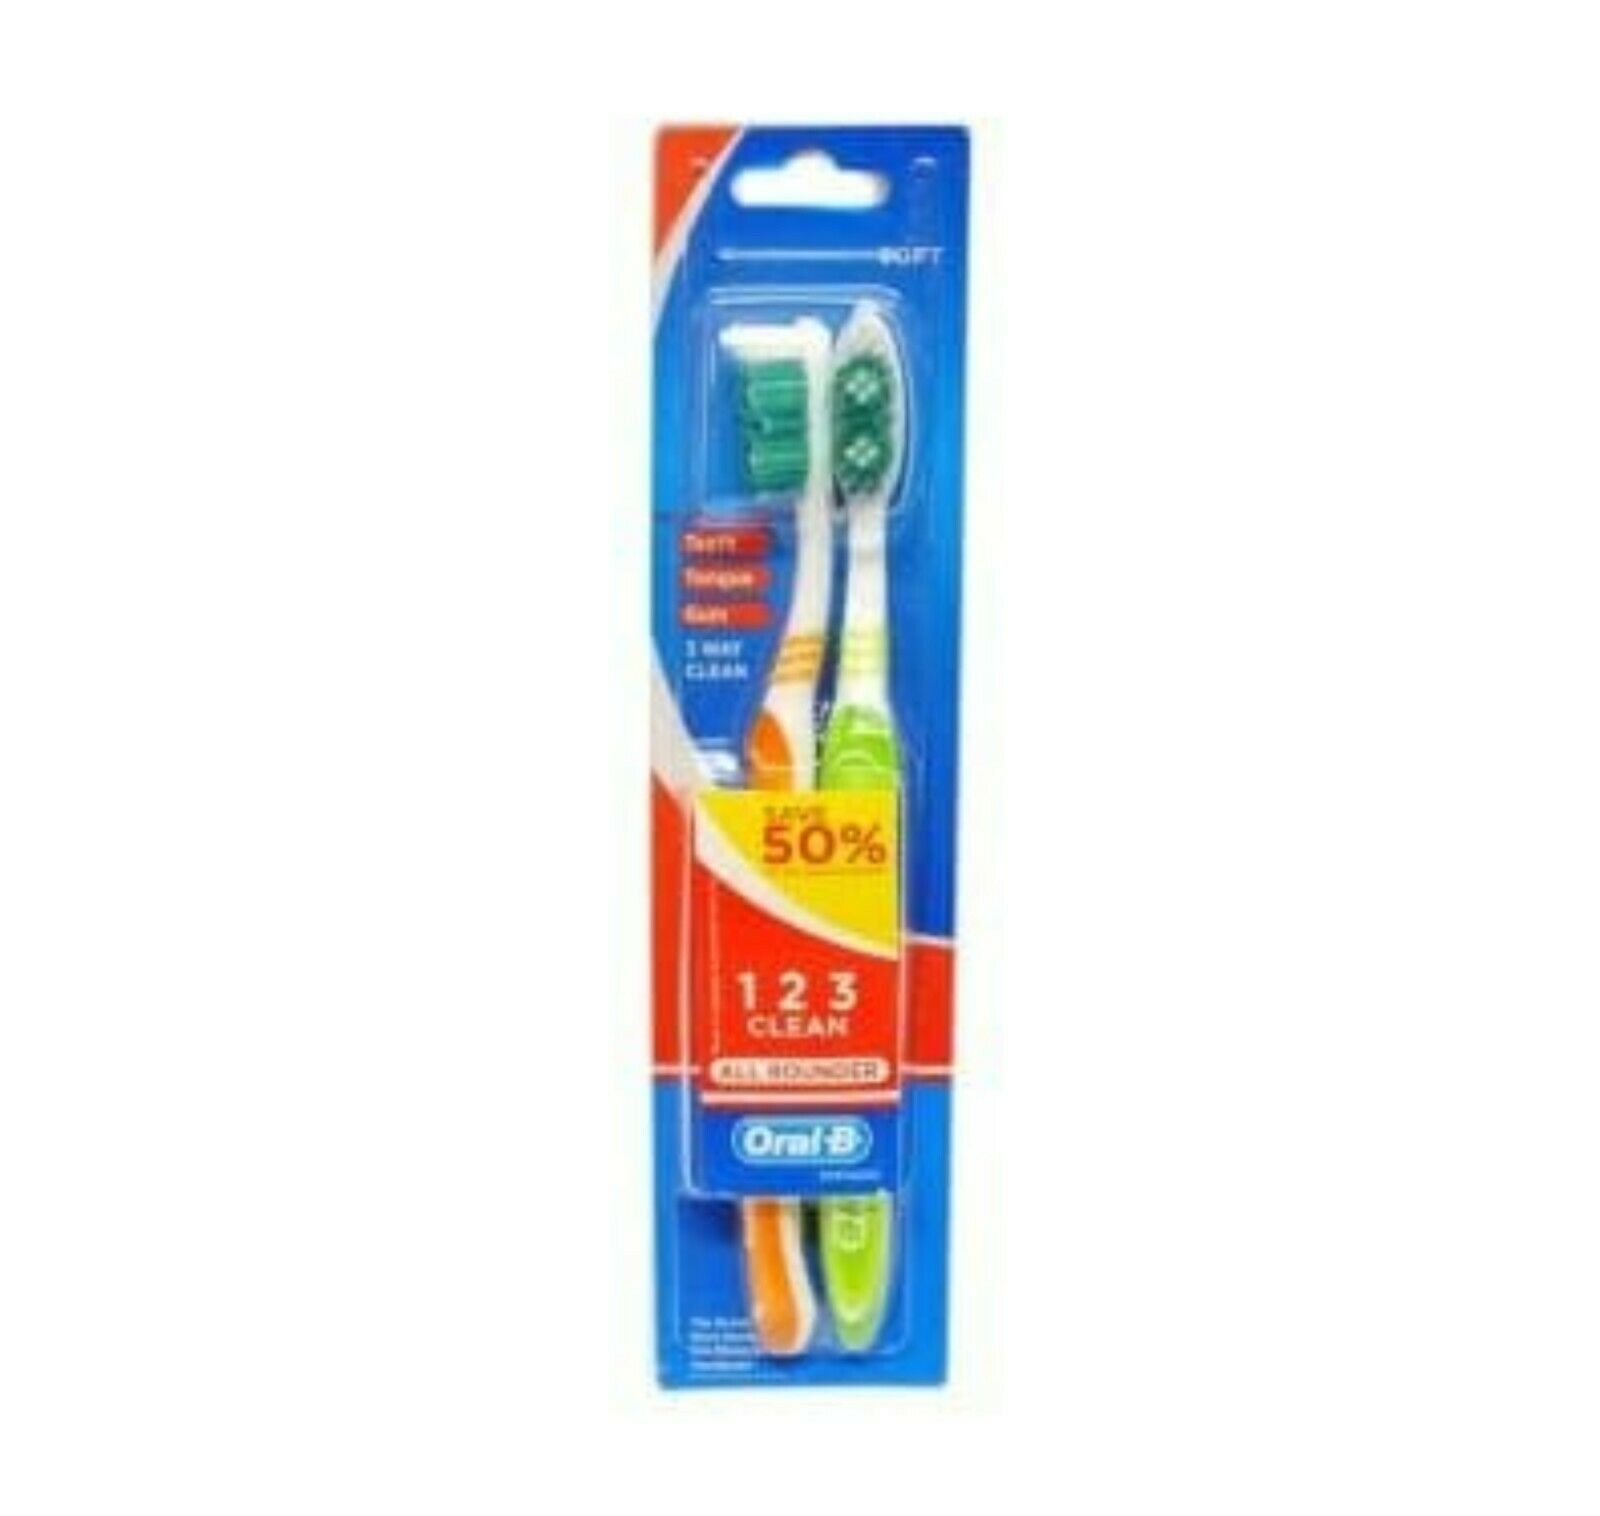 Oral-b Oralb All Rounder Toothbrush 2 Pack Soft Bristles